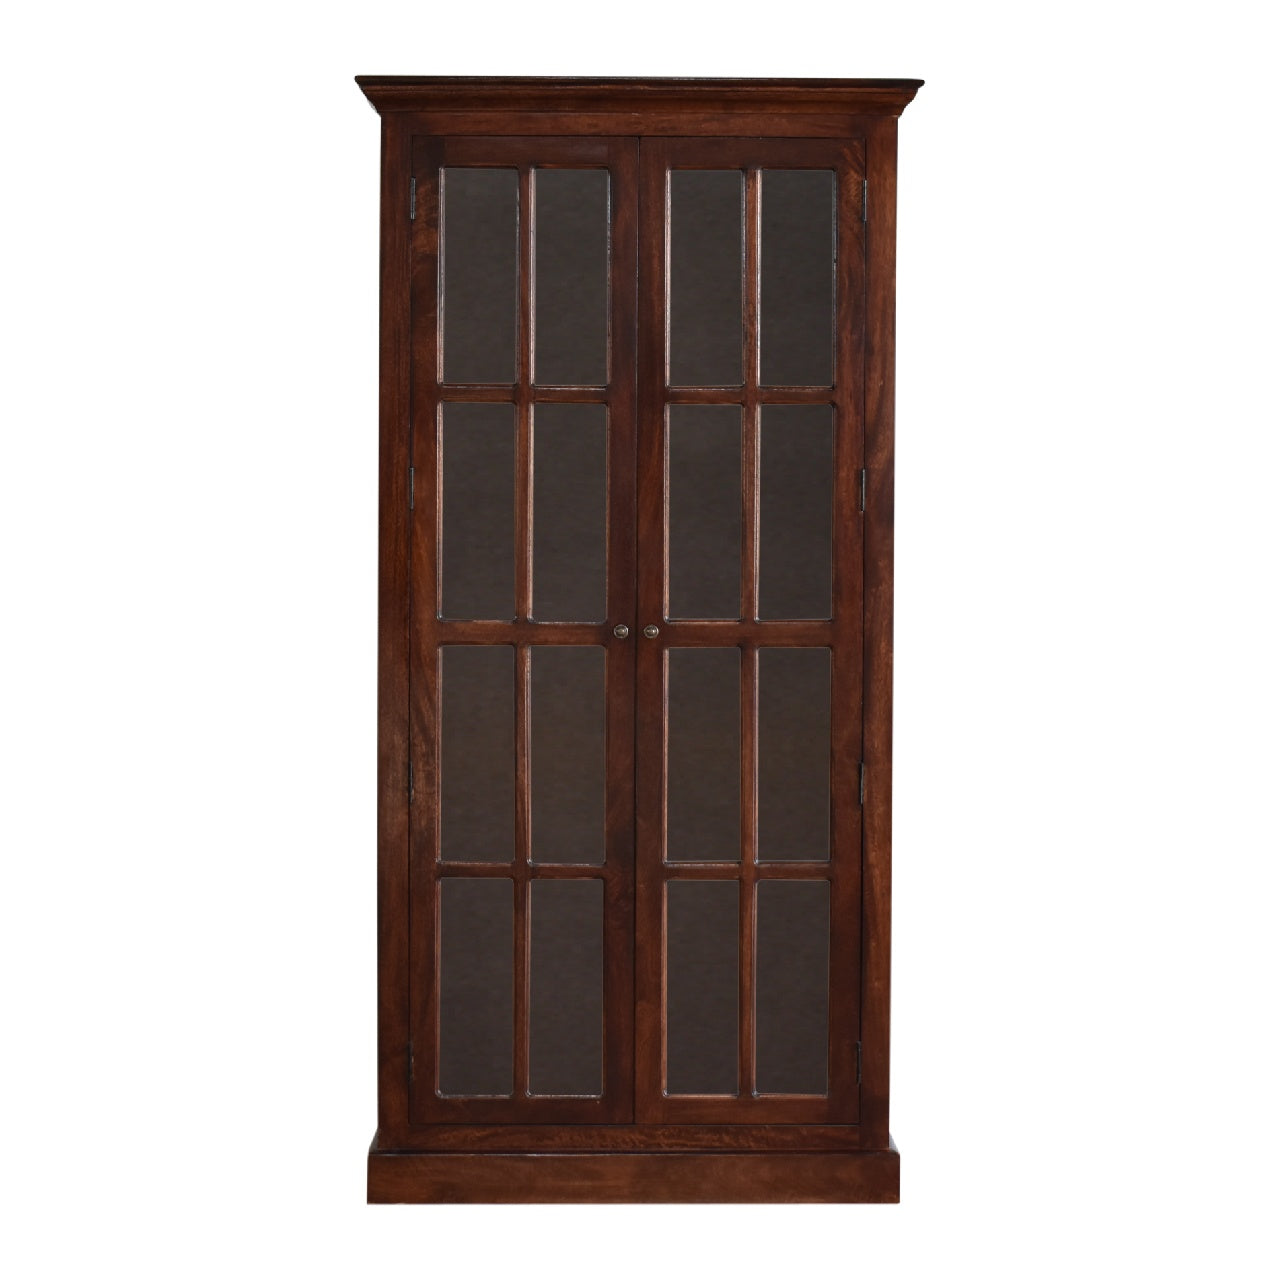 View Tall Cherry Glazed Cabinet information